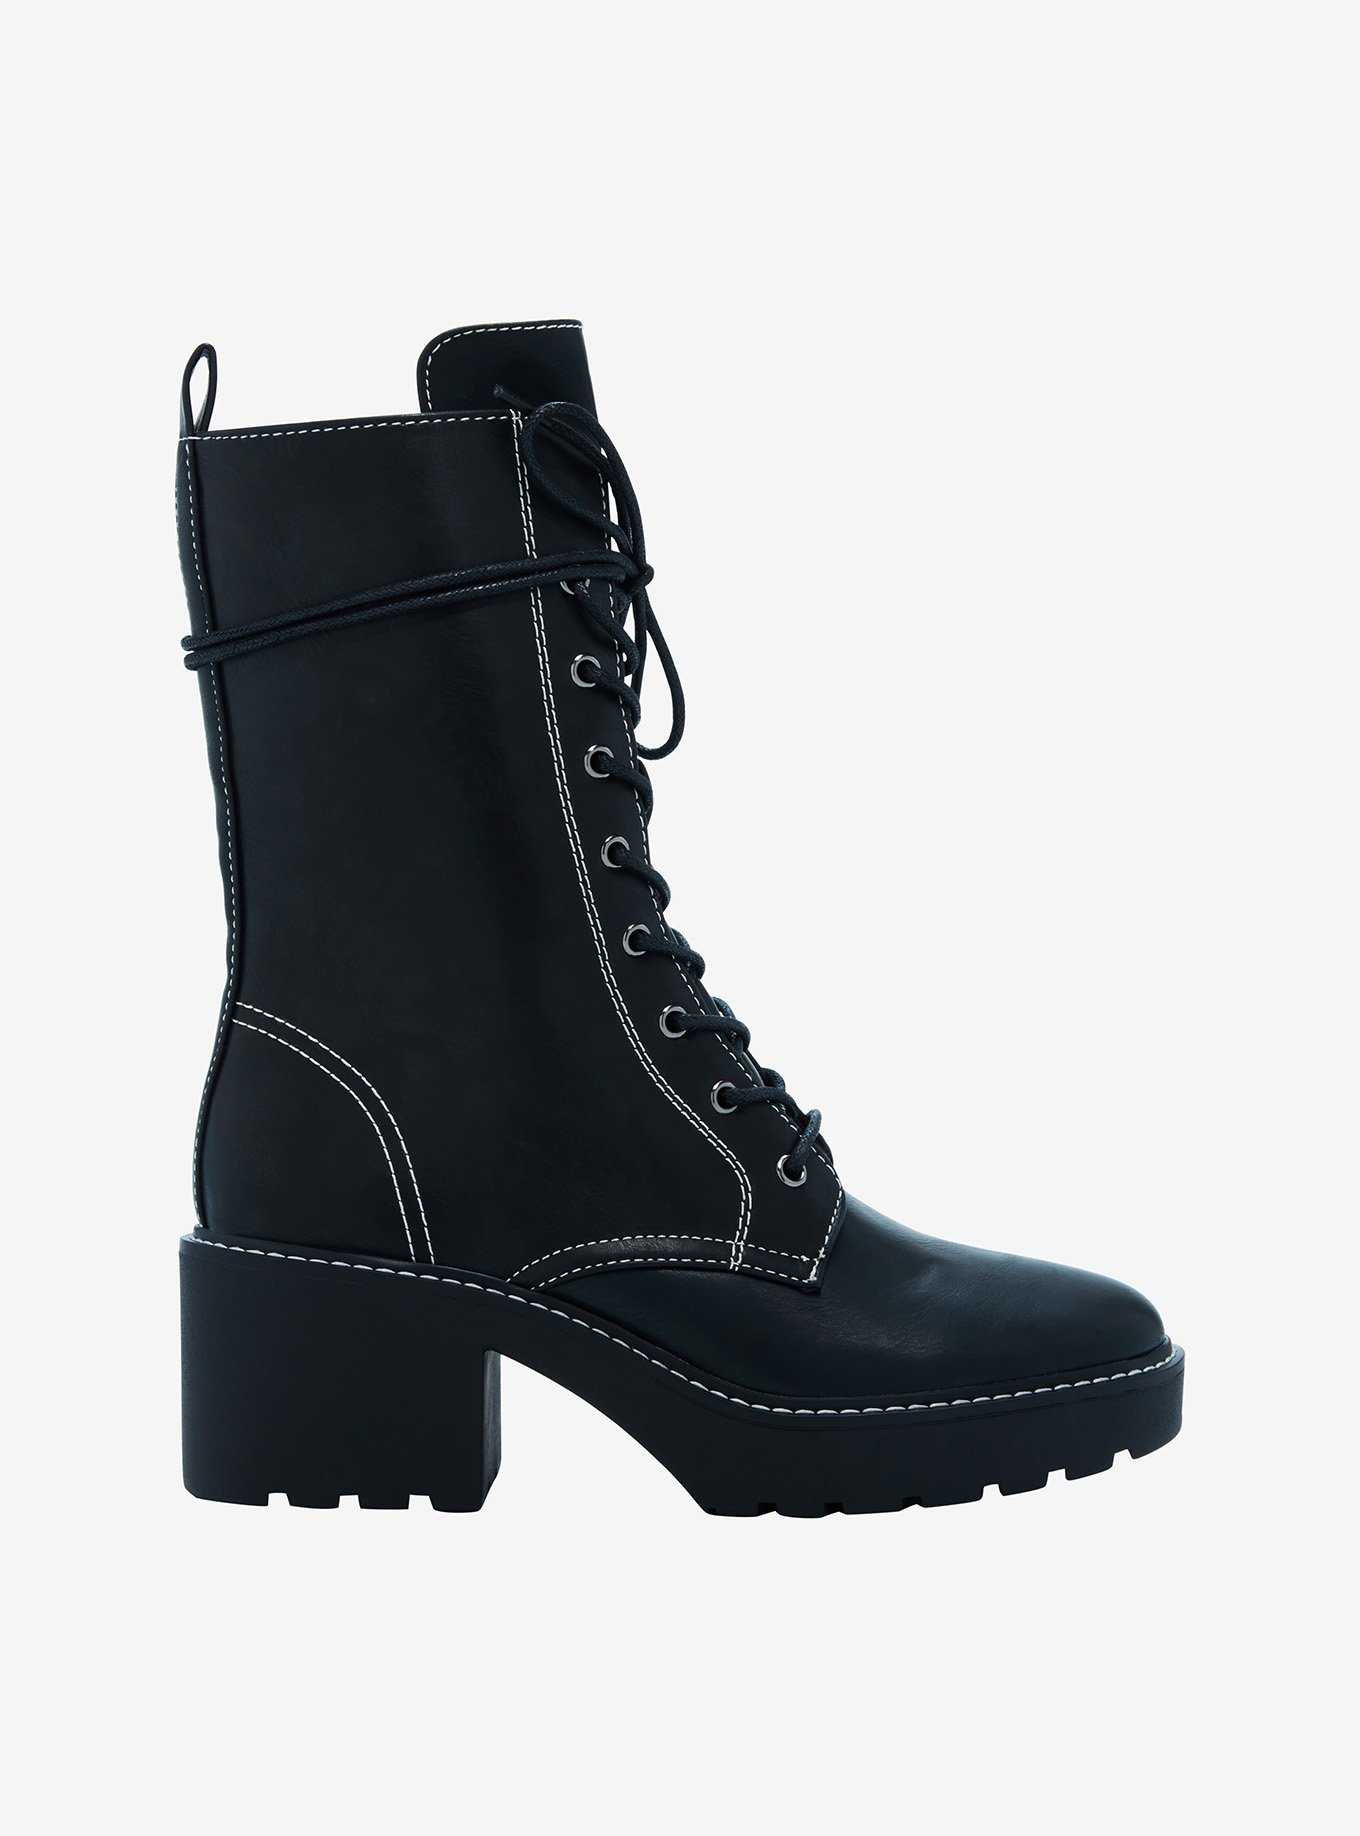 Chinese Laundry Black & White Contrast Stitch Combat Boots, , hi-res